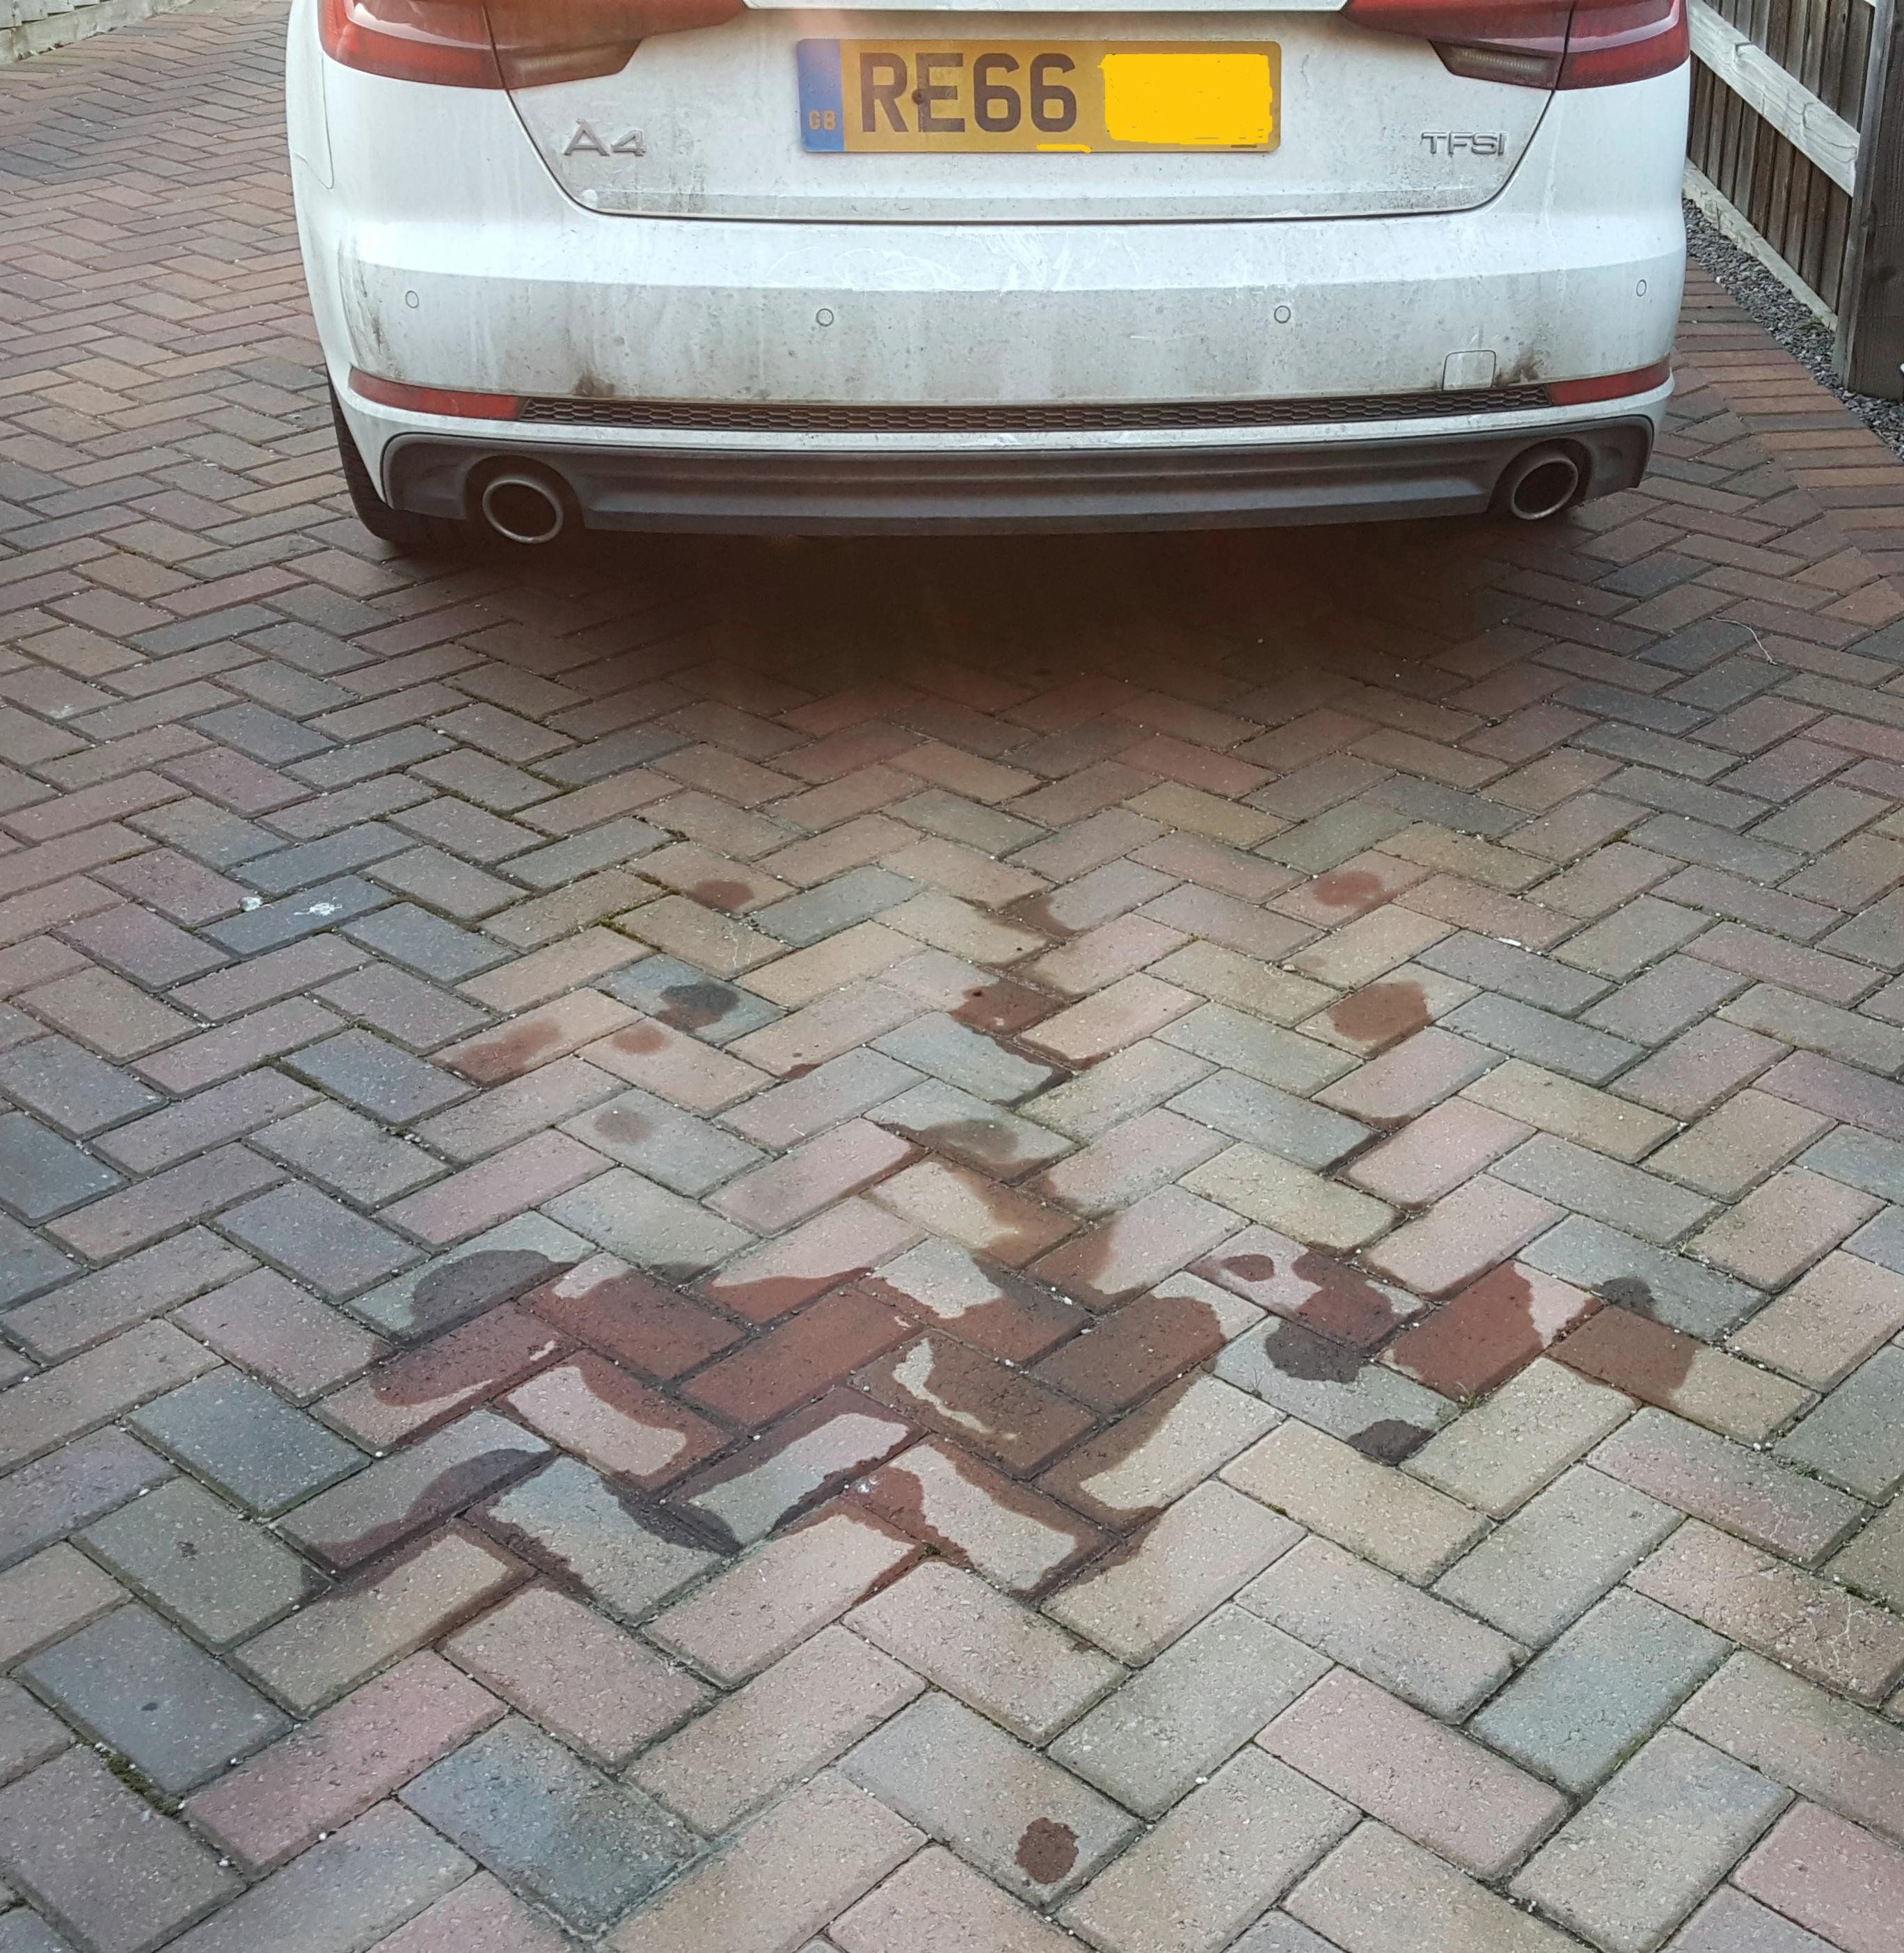 oil leaking from Audi car